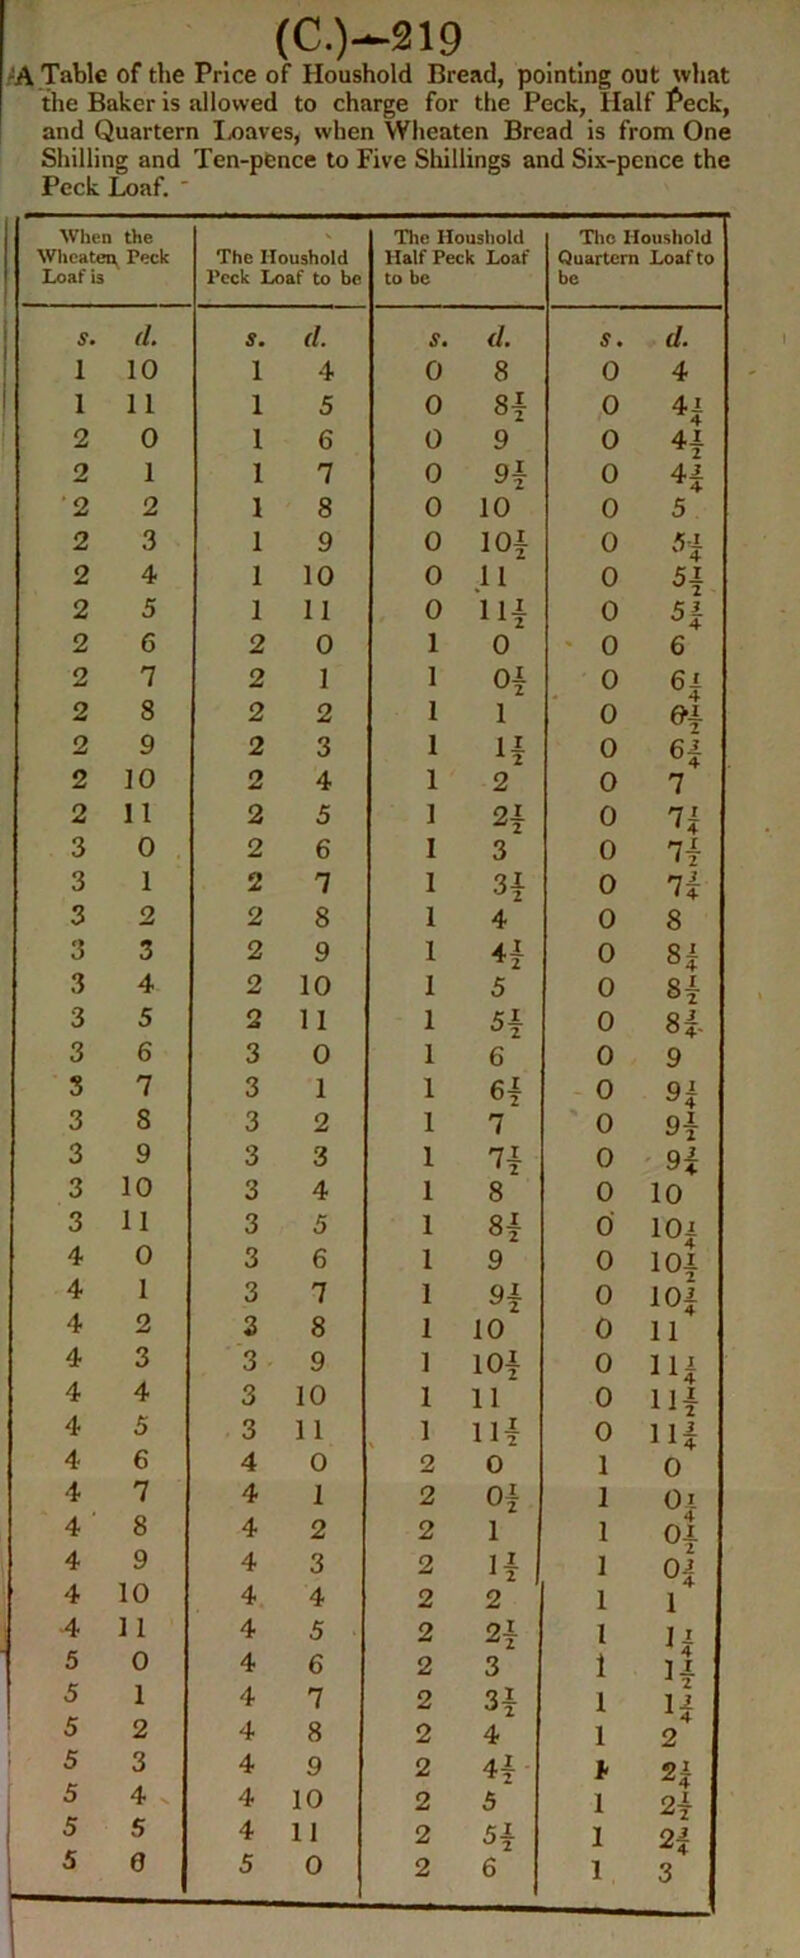 (C.)-219 .'A Table of the Price of Houshold Bread, pointing out what tlie Baker is allowed to charge for the Peck, Half Peck, and Quartern I/javes, when Wheaten Bread is from One Shilling and Ten-pence to Five Shillings and Six-pence the Peck Loaf.  When the The Houshold The Houshold Wheaten Peck The Houshold Half Peck loaf Quartern Loaf to Loaf is Peck Loaf to be to be be S. (1. S. f/. S. f/. s. d. 1 10 1 4 0 8 0 4 1 11 1 5 0 8i P H 2 0 1 6 0 9 0 4i 2 1 1 7 0 9| 0 H '2 2 1 8 0 10 0 5 2 3 1 9 0 101 0 K.l 2 4 1 10 0 11 0 2 5 1 11 , 0 Hi 0 5| 2 6 2 0 1 0 ' 0 6 2 7 2 1 1 Oi 0 2 8 2 2 1 1 0 2 9 2 3 1 0 H 2 10 2 4 1 2 0 7 2 11 2 5 1 2| 0 7^ 3 0 . 2 6 1 3 0 7i 3 1 2 7 1 3i 0 7i 3 2 2 8 1 4 0 8 3 3 2 9 1 0 3 4 2 10 1 5 0 8i 3 5 2 11 1 0 8i 3 6 3 0 1 6 0 9 3 7 3 1 1 - 0 3 8 3 2 1 7 ' 0 9i 3 9 3 3 1 0 ' H 3 10 3 4 1 8 0 10 3 11 3 5 1 81 d lOi 4 0 3 6 1 9 0 101 4 1 3 7 1 0 101 4 2 2 8 1 10 0 11 4 3 3 9 1 101 0 4 4 3 10 1 11 0 Hi 4 5 3 11 1 Hi 0 111 4 6 4 0 2 0 1 0 4 7 4 1 2 oi 1 4 ■ 8 4 2 2 1 1 4 9 4 3 2 li 1 4 10 4 4 2 2 1 1 4 11 4 5 2 2i 1 Ii 5 0 4 6 2 3 1 4 11 5 1 4 7 2 3i 1 11 5 2 4 8 2 4 1 2 5 5 3 4 V 4 4 9 10 2 2 4i- 5 4 1 21 2i 5 5 5 0 4 5 11 0 2 2 5i 6 1 2|